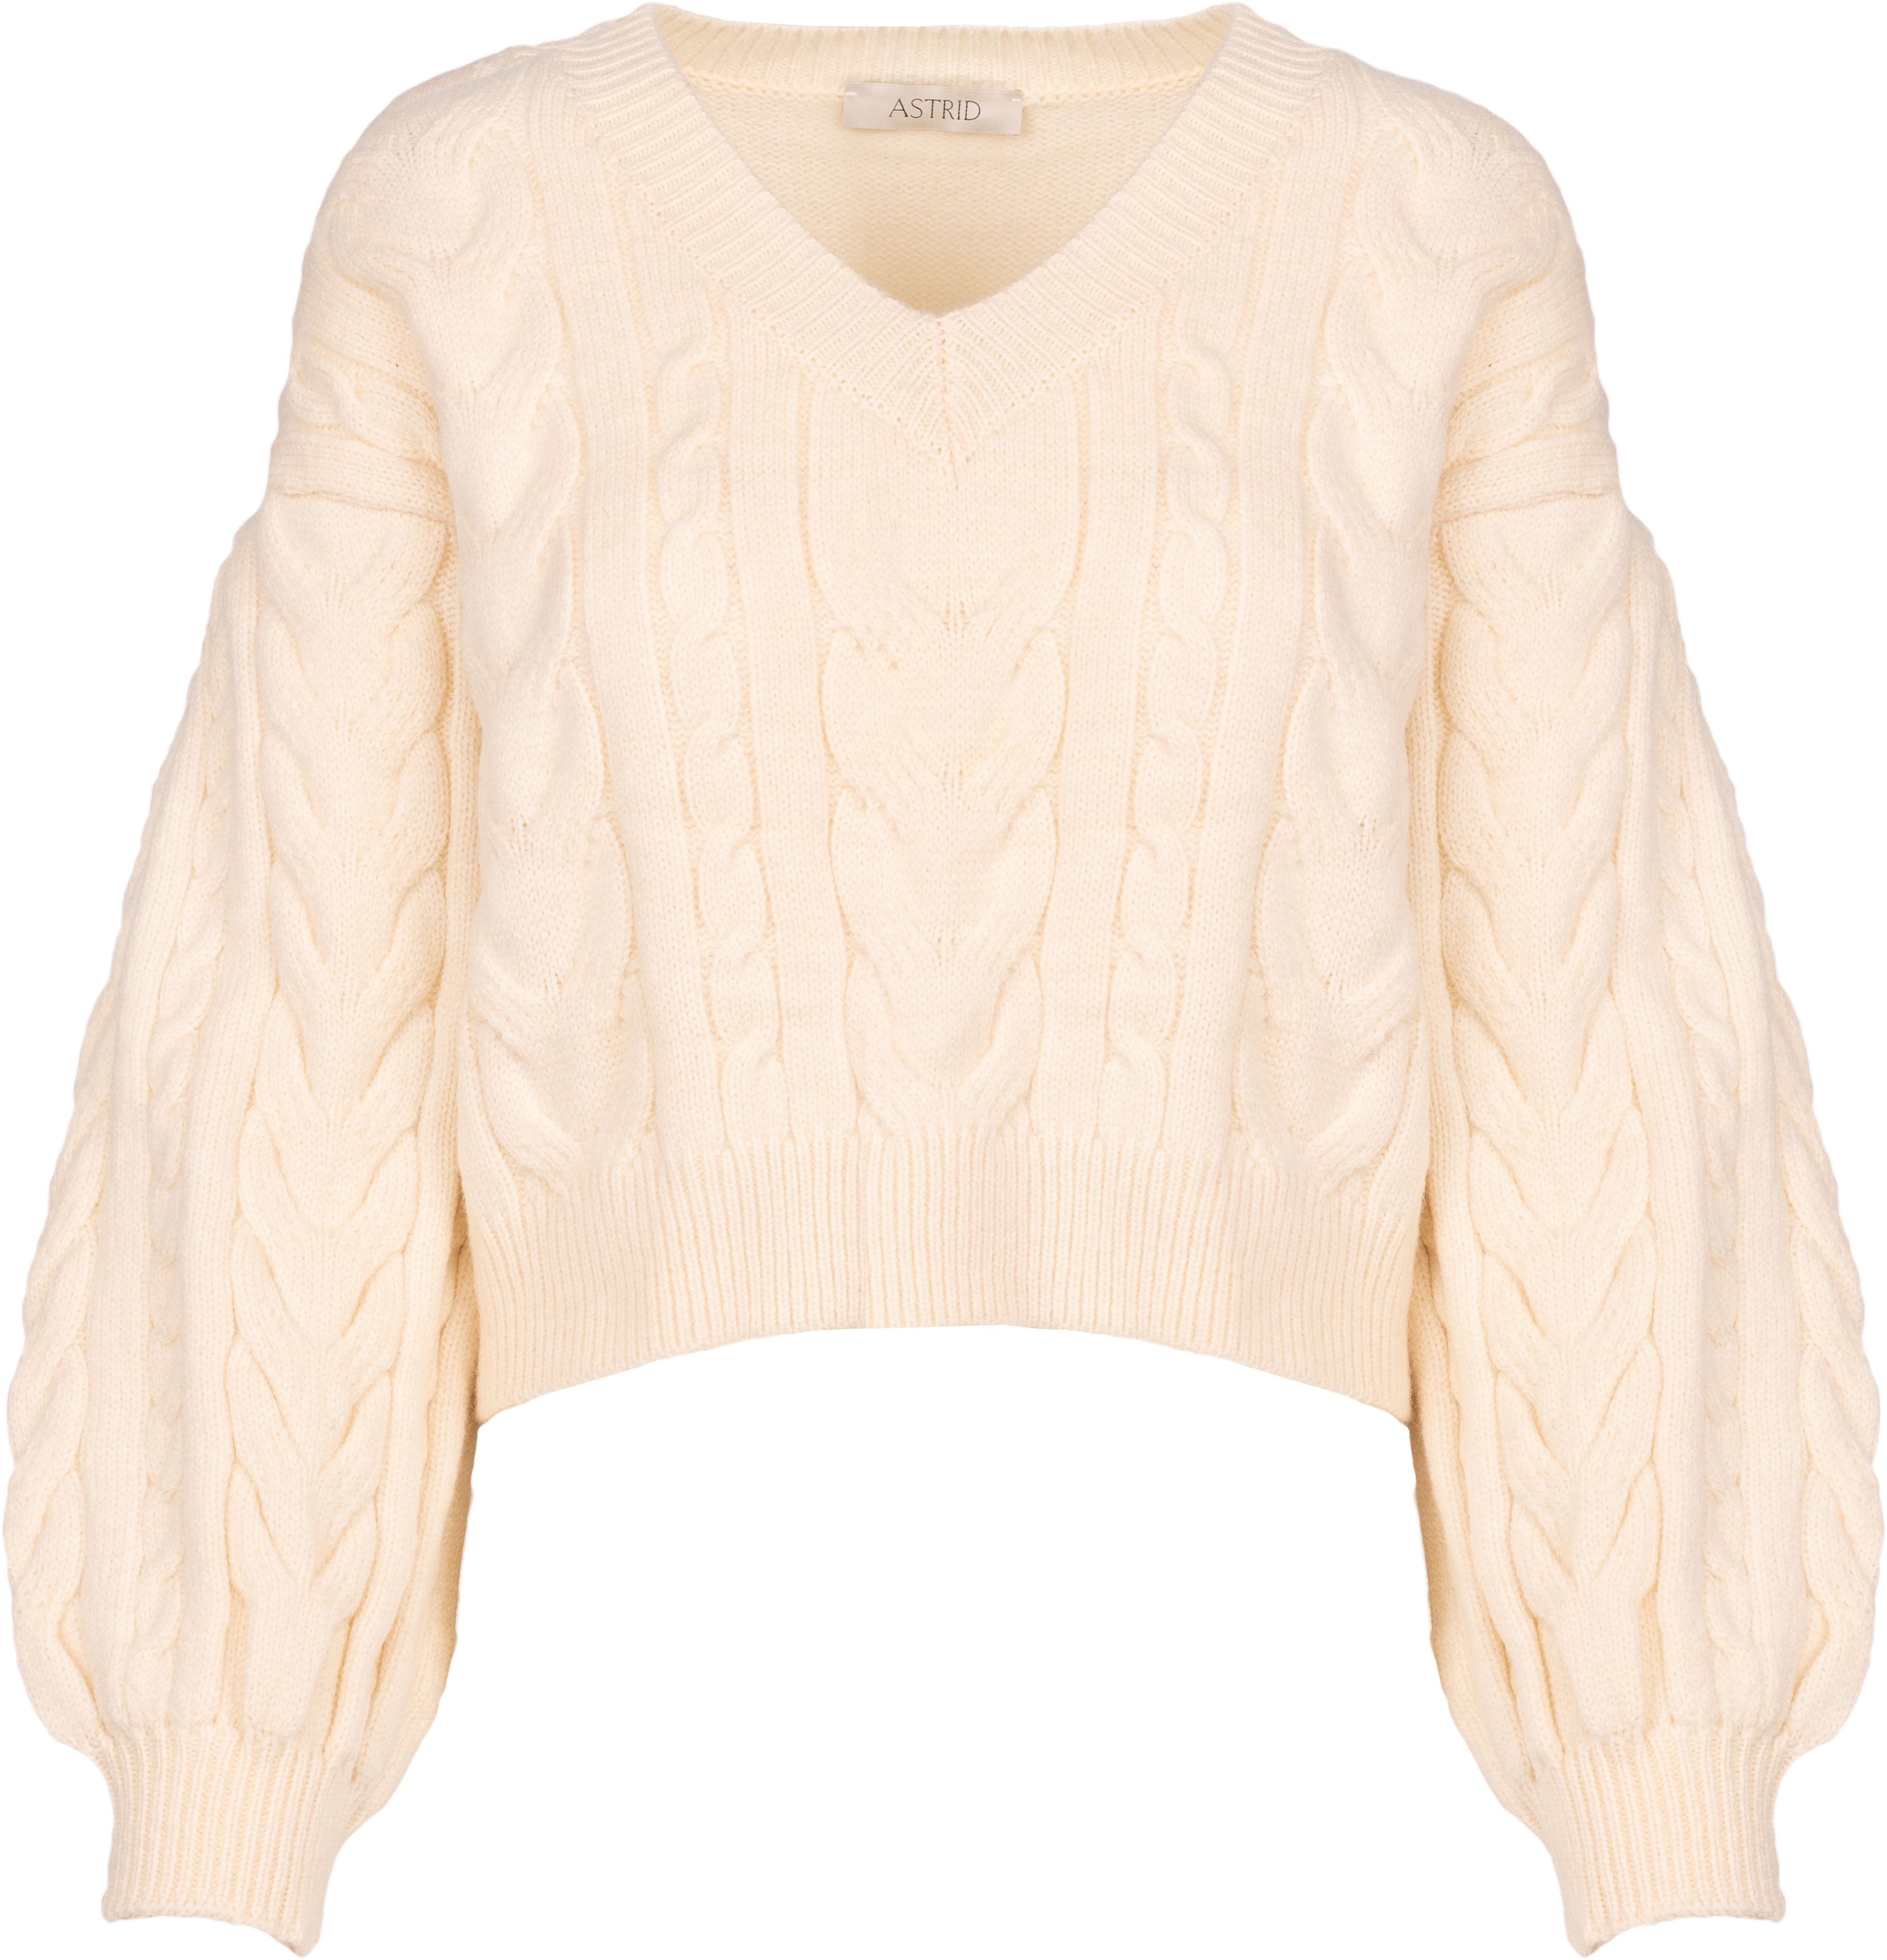 Astrid V-Neck Chunky Cable Knit Sweater